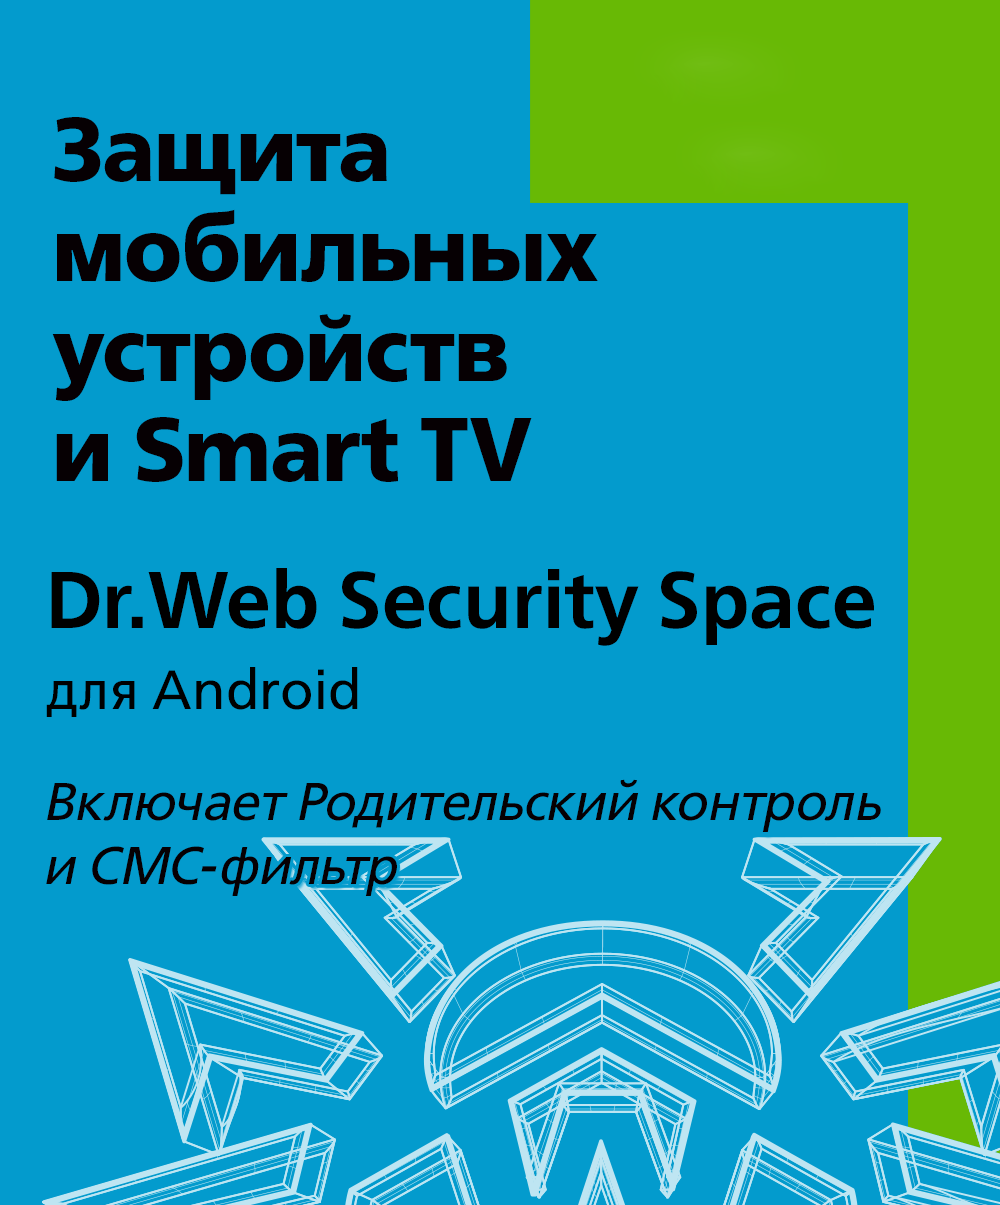 Dr.Web Security Space (for mobile devices) - for 4 devices, for 12 months, KZ